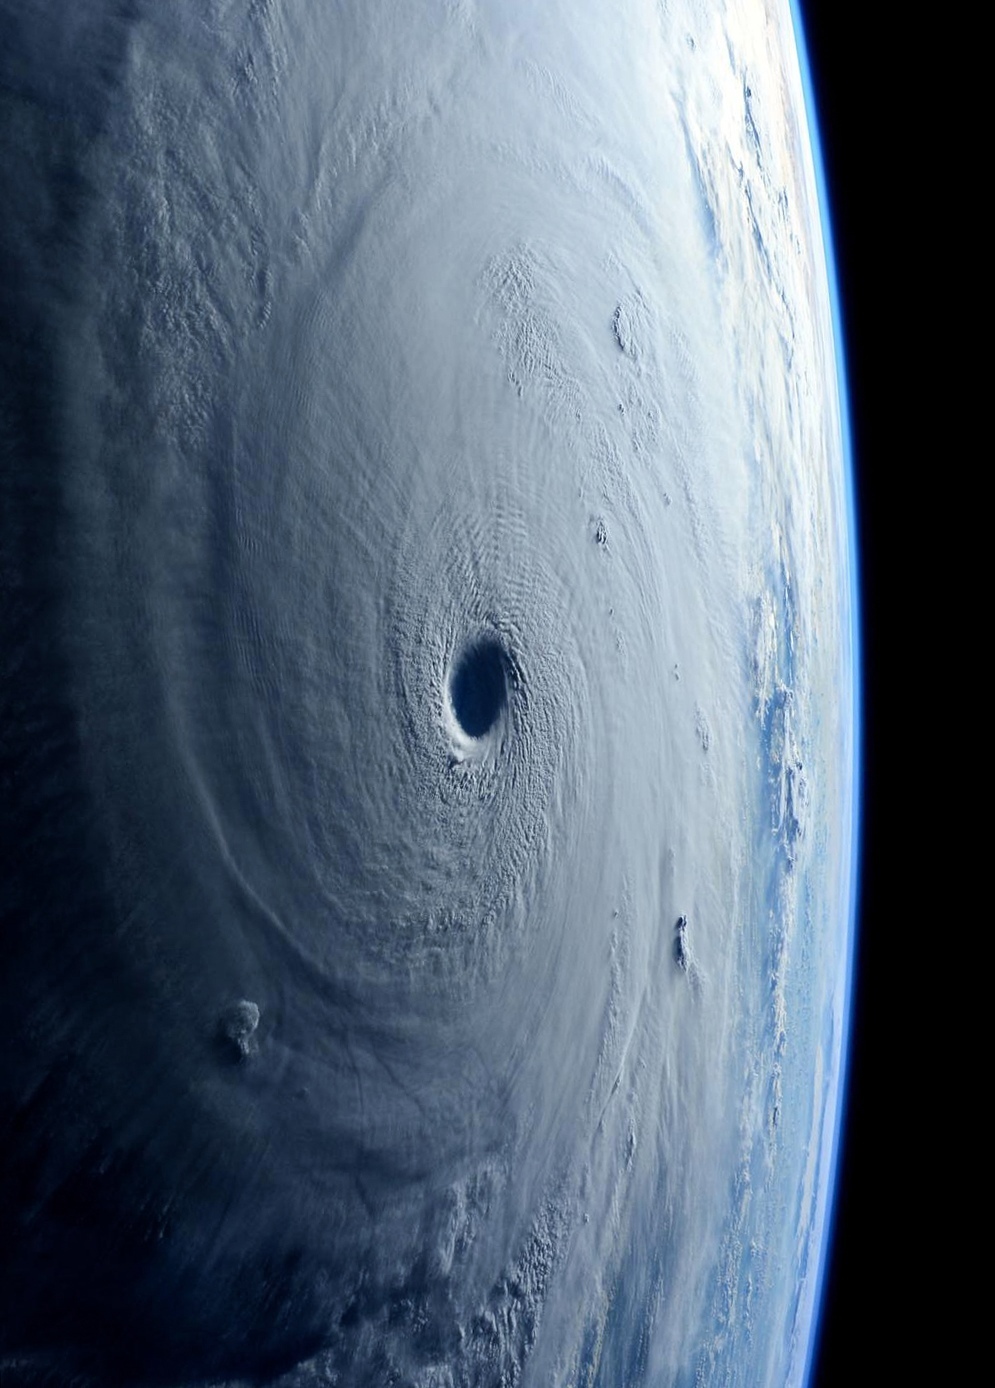 Super Typhoon Maysak over the Pacific Ocean as seen from the International Space Station - Astronomy, Typhoon, View from the ISS, Copy-paste, Repeat, 2020, Pictures from space, The photo